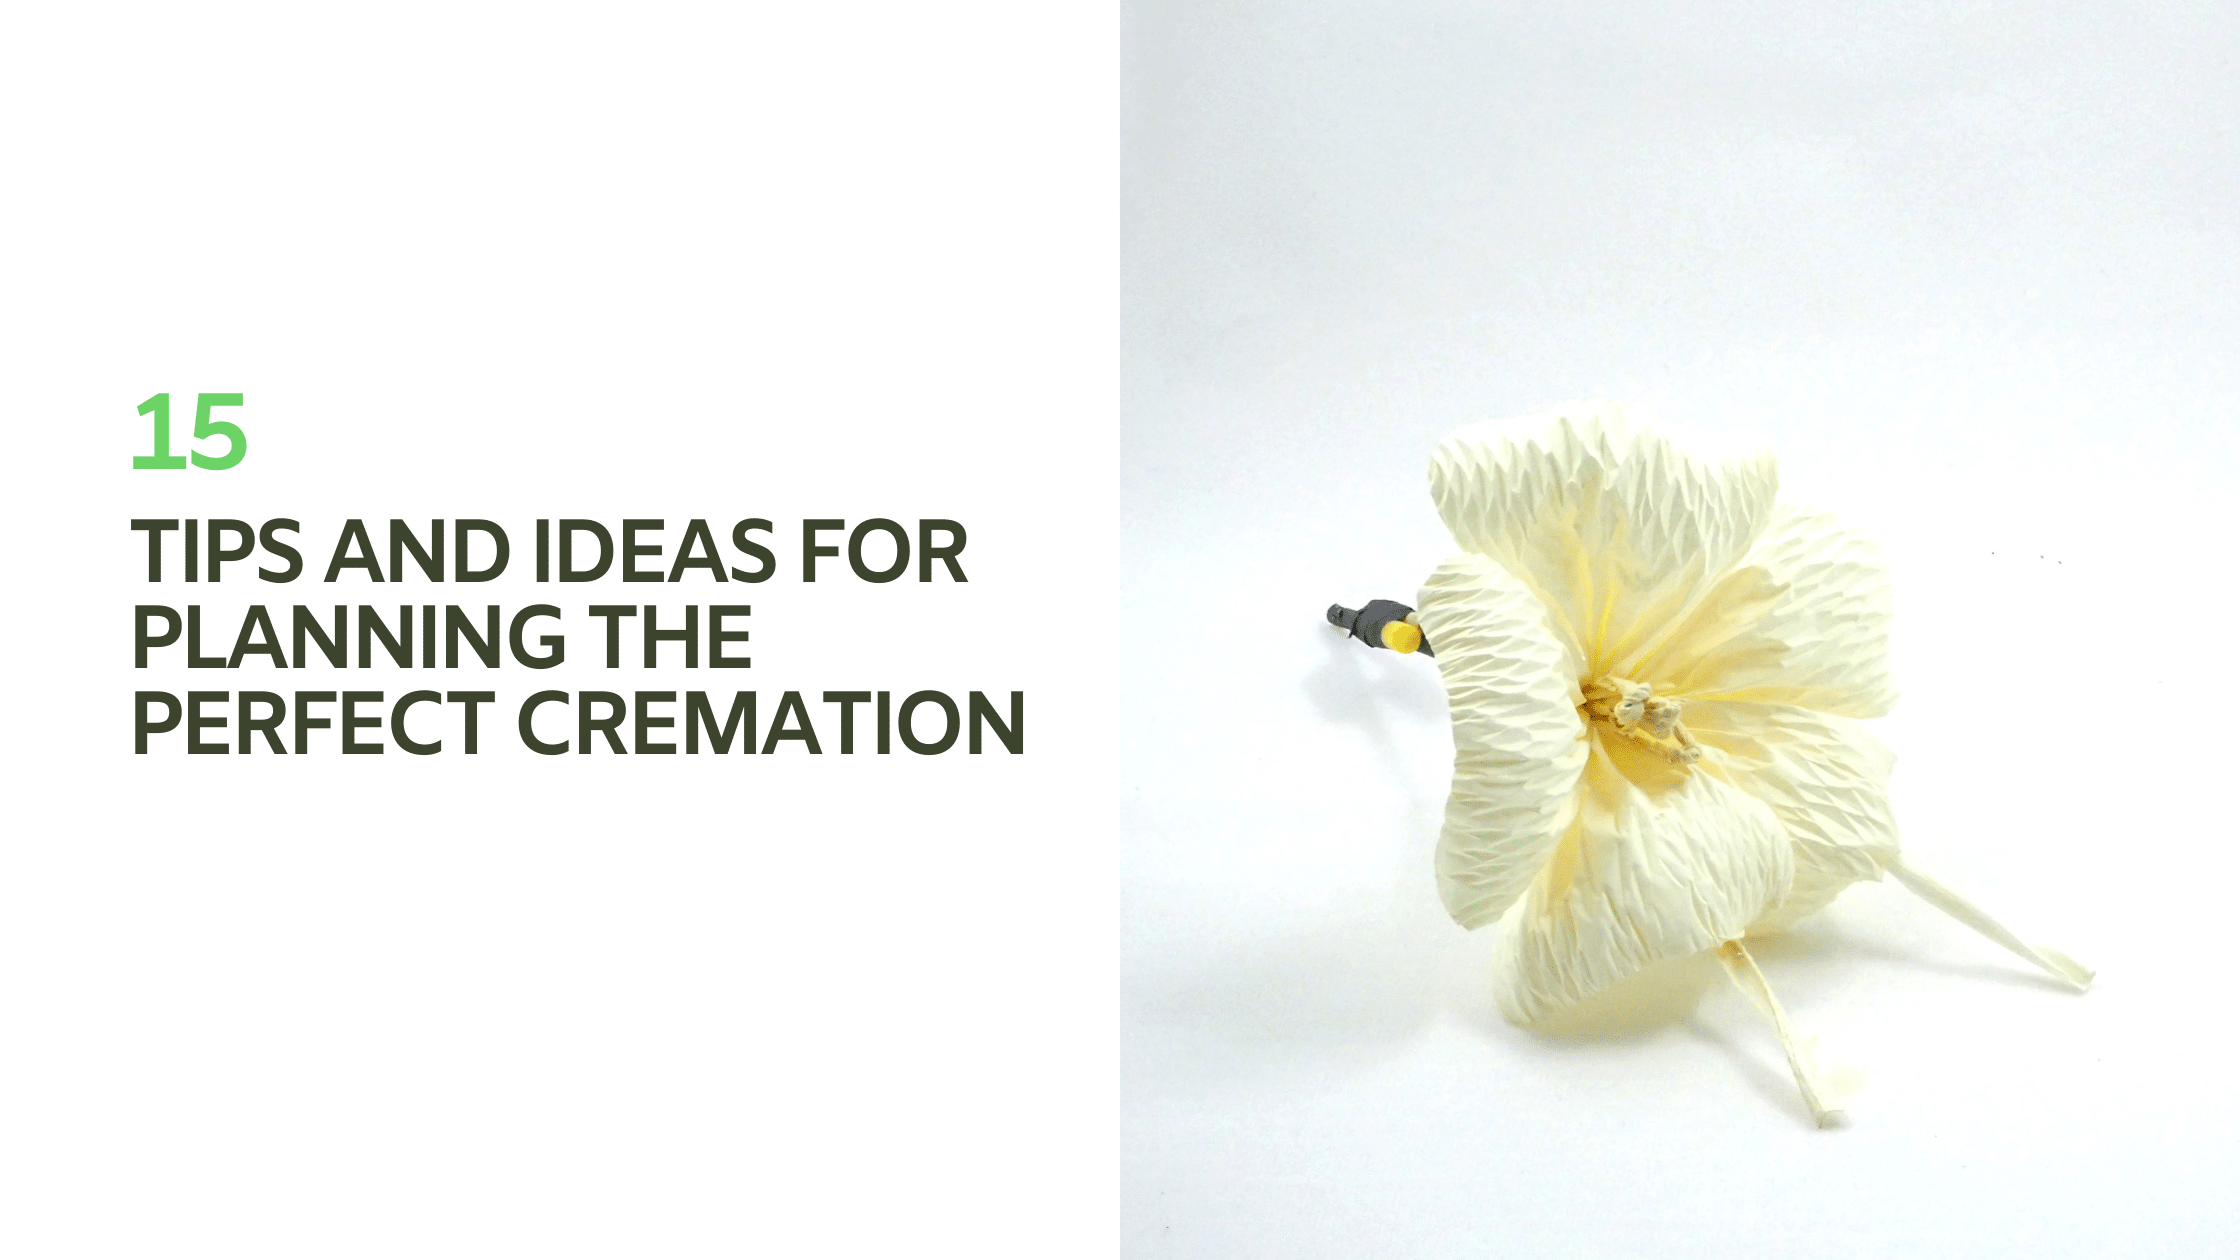 15 Tips and Ideas for Planning the Perfect Cremation